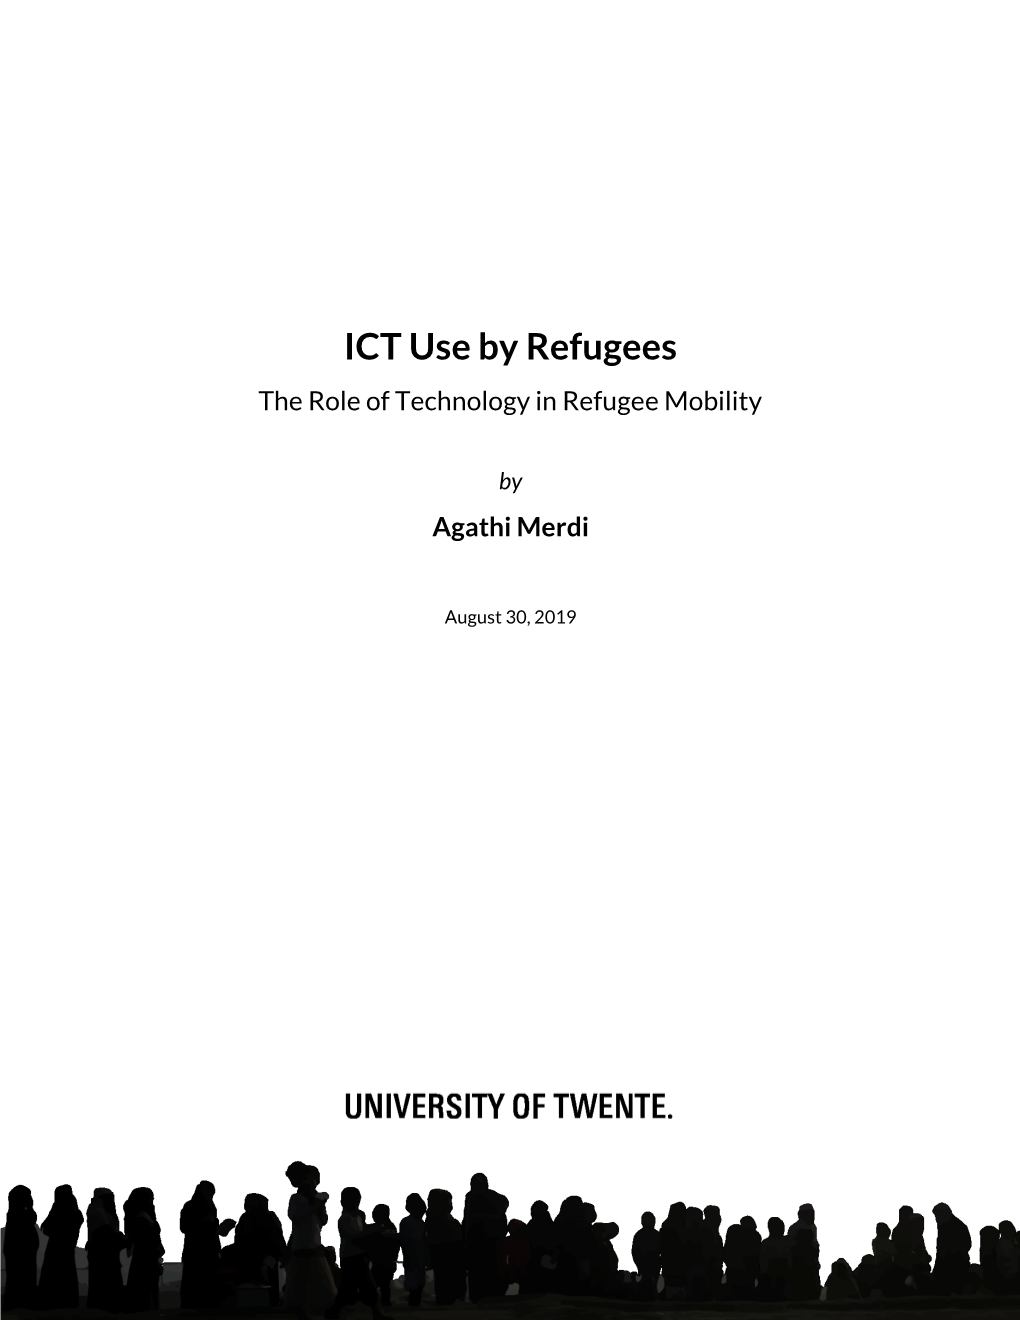 ICT Use by Refugees the Role of Technology in Refugee Mobility